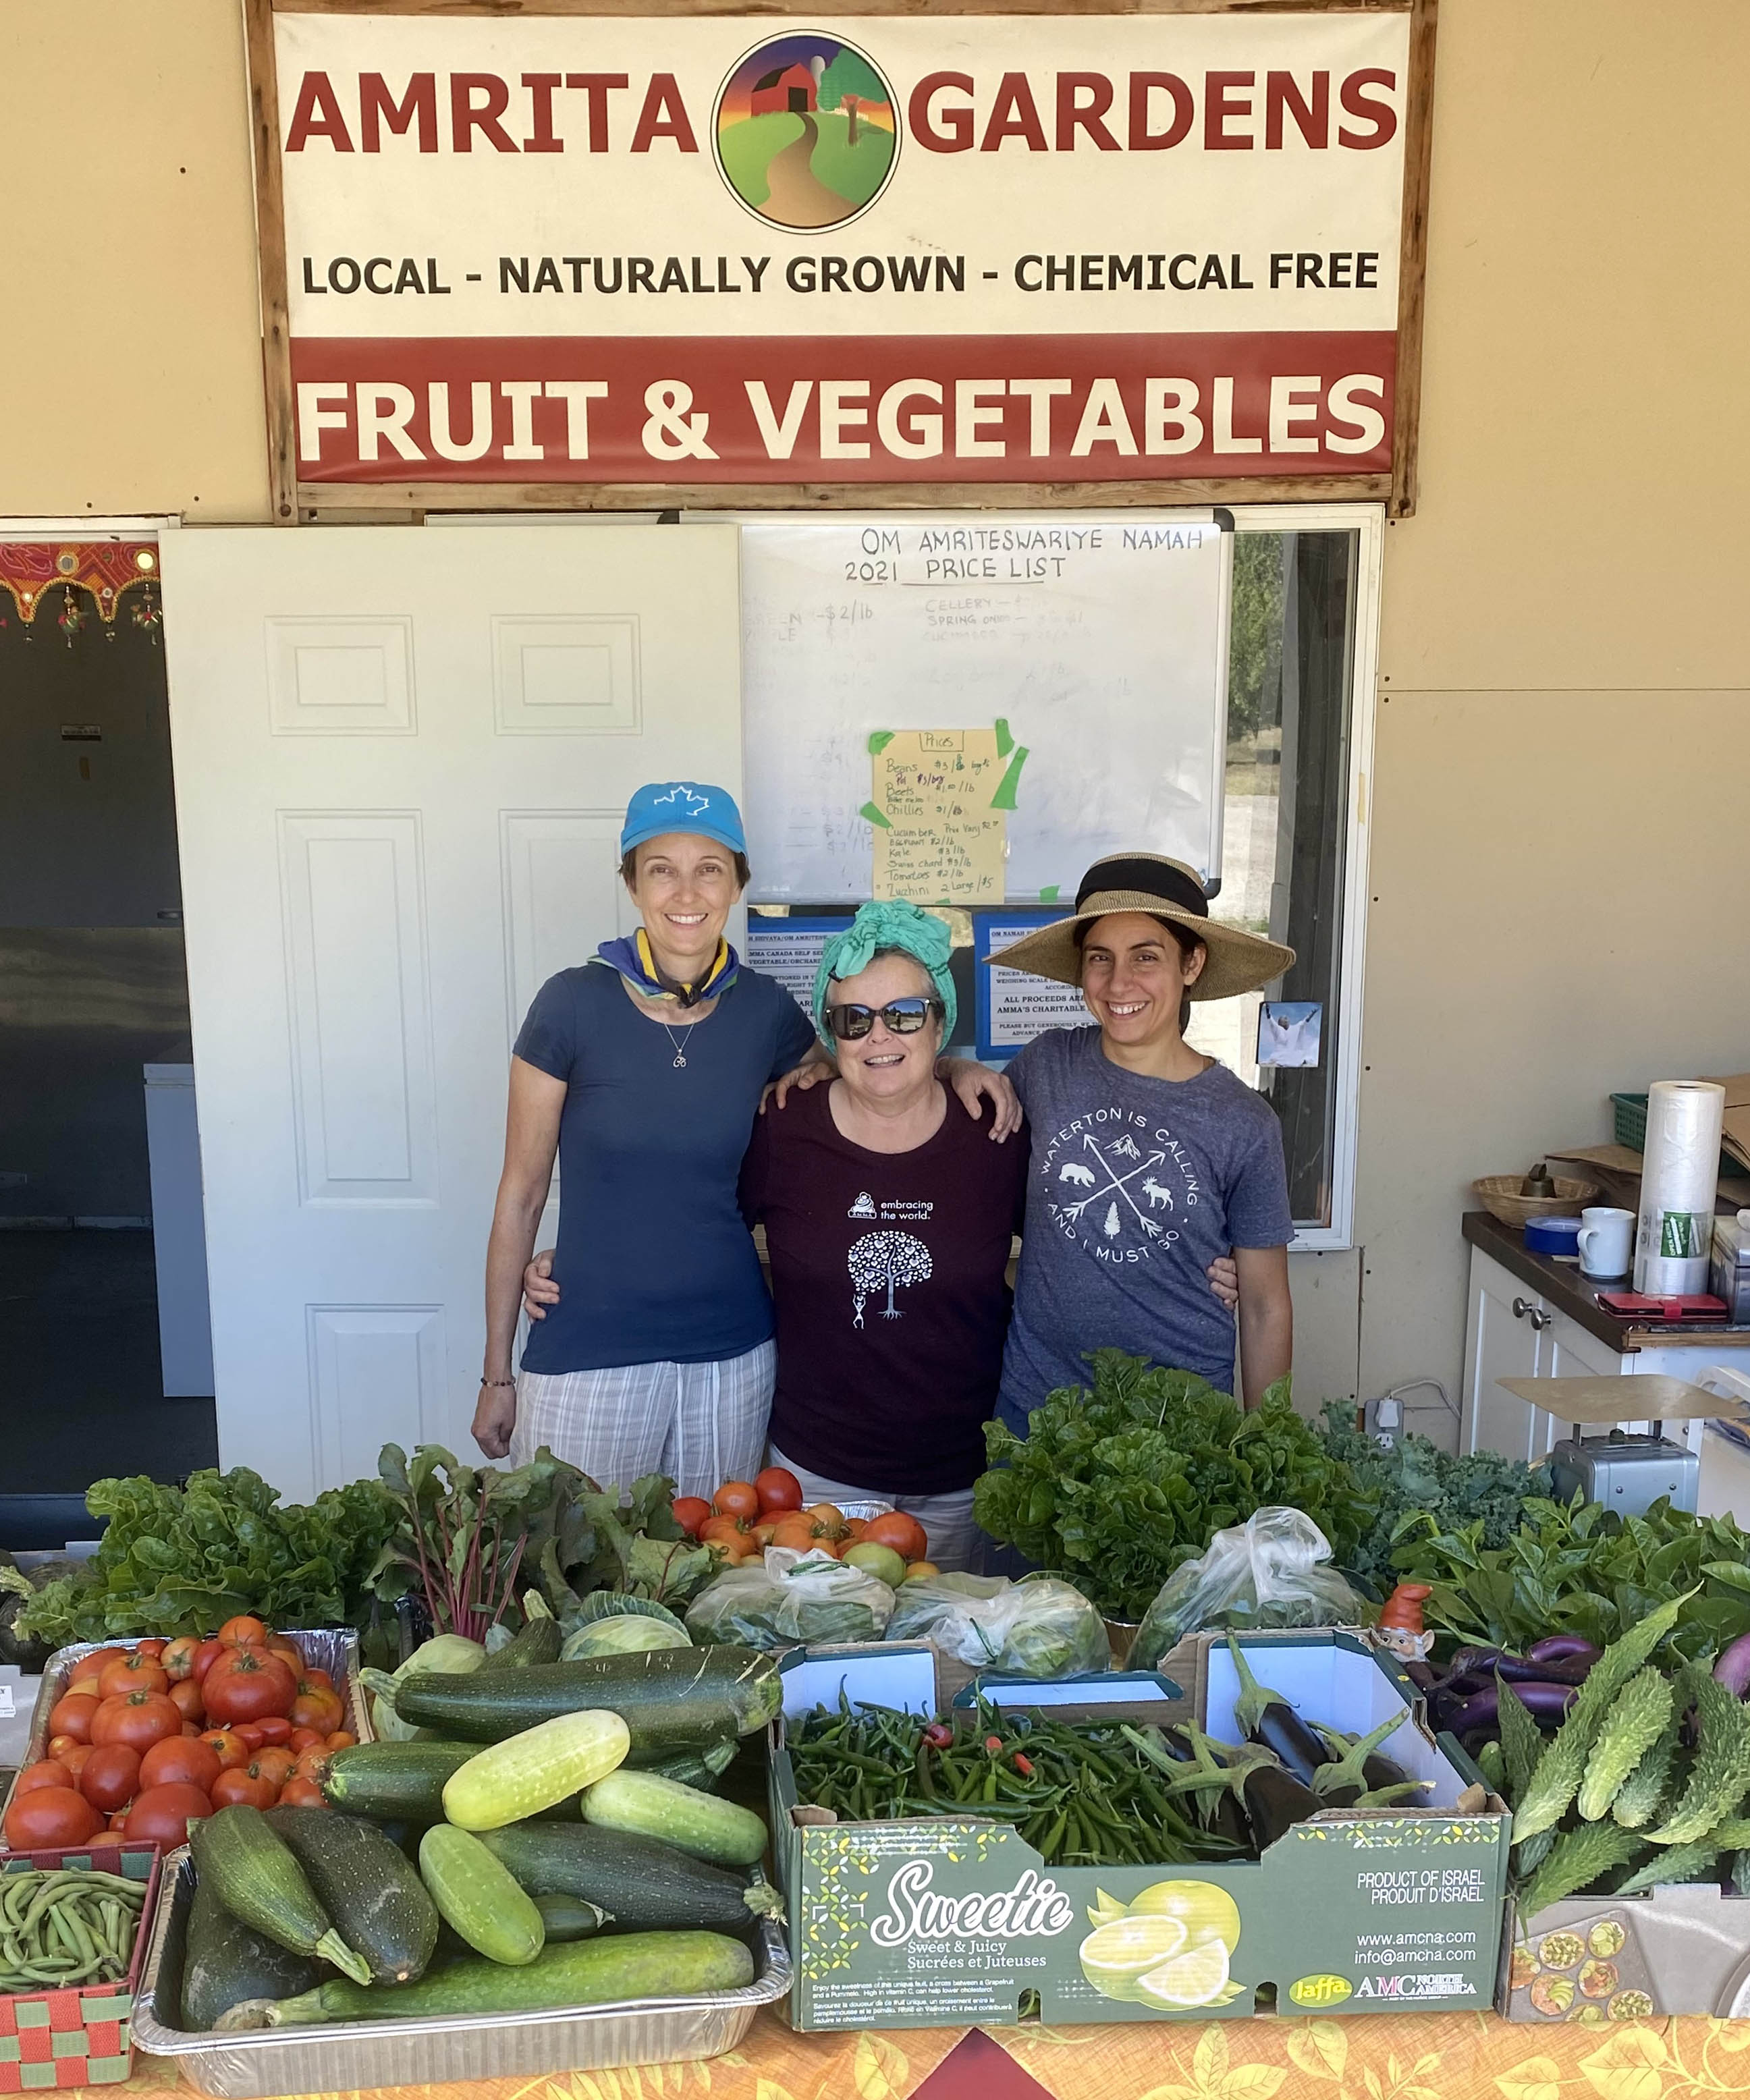 Three volunteers at the Farm stand, loaded with fresh veggies